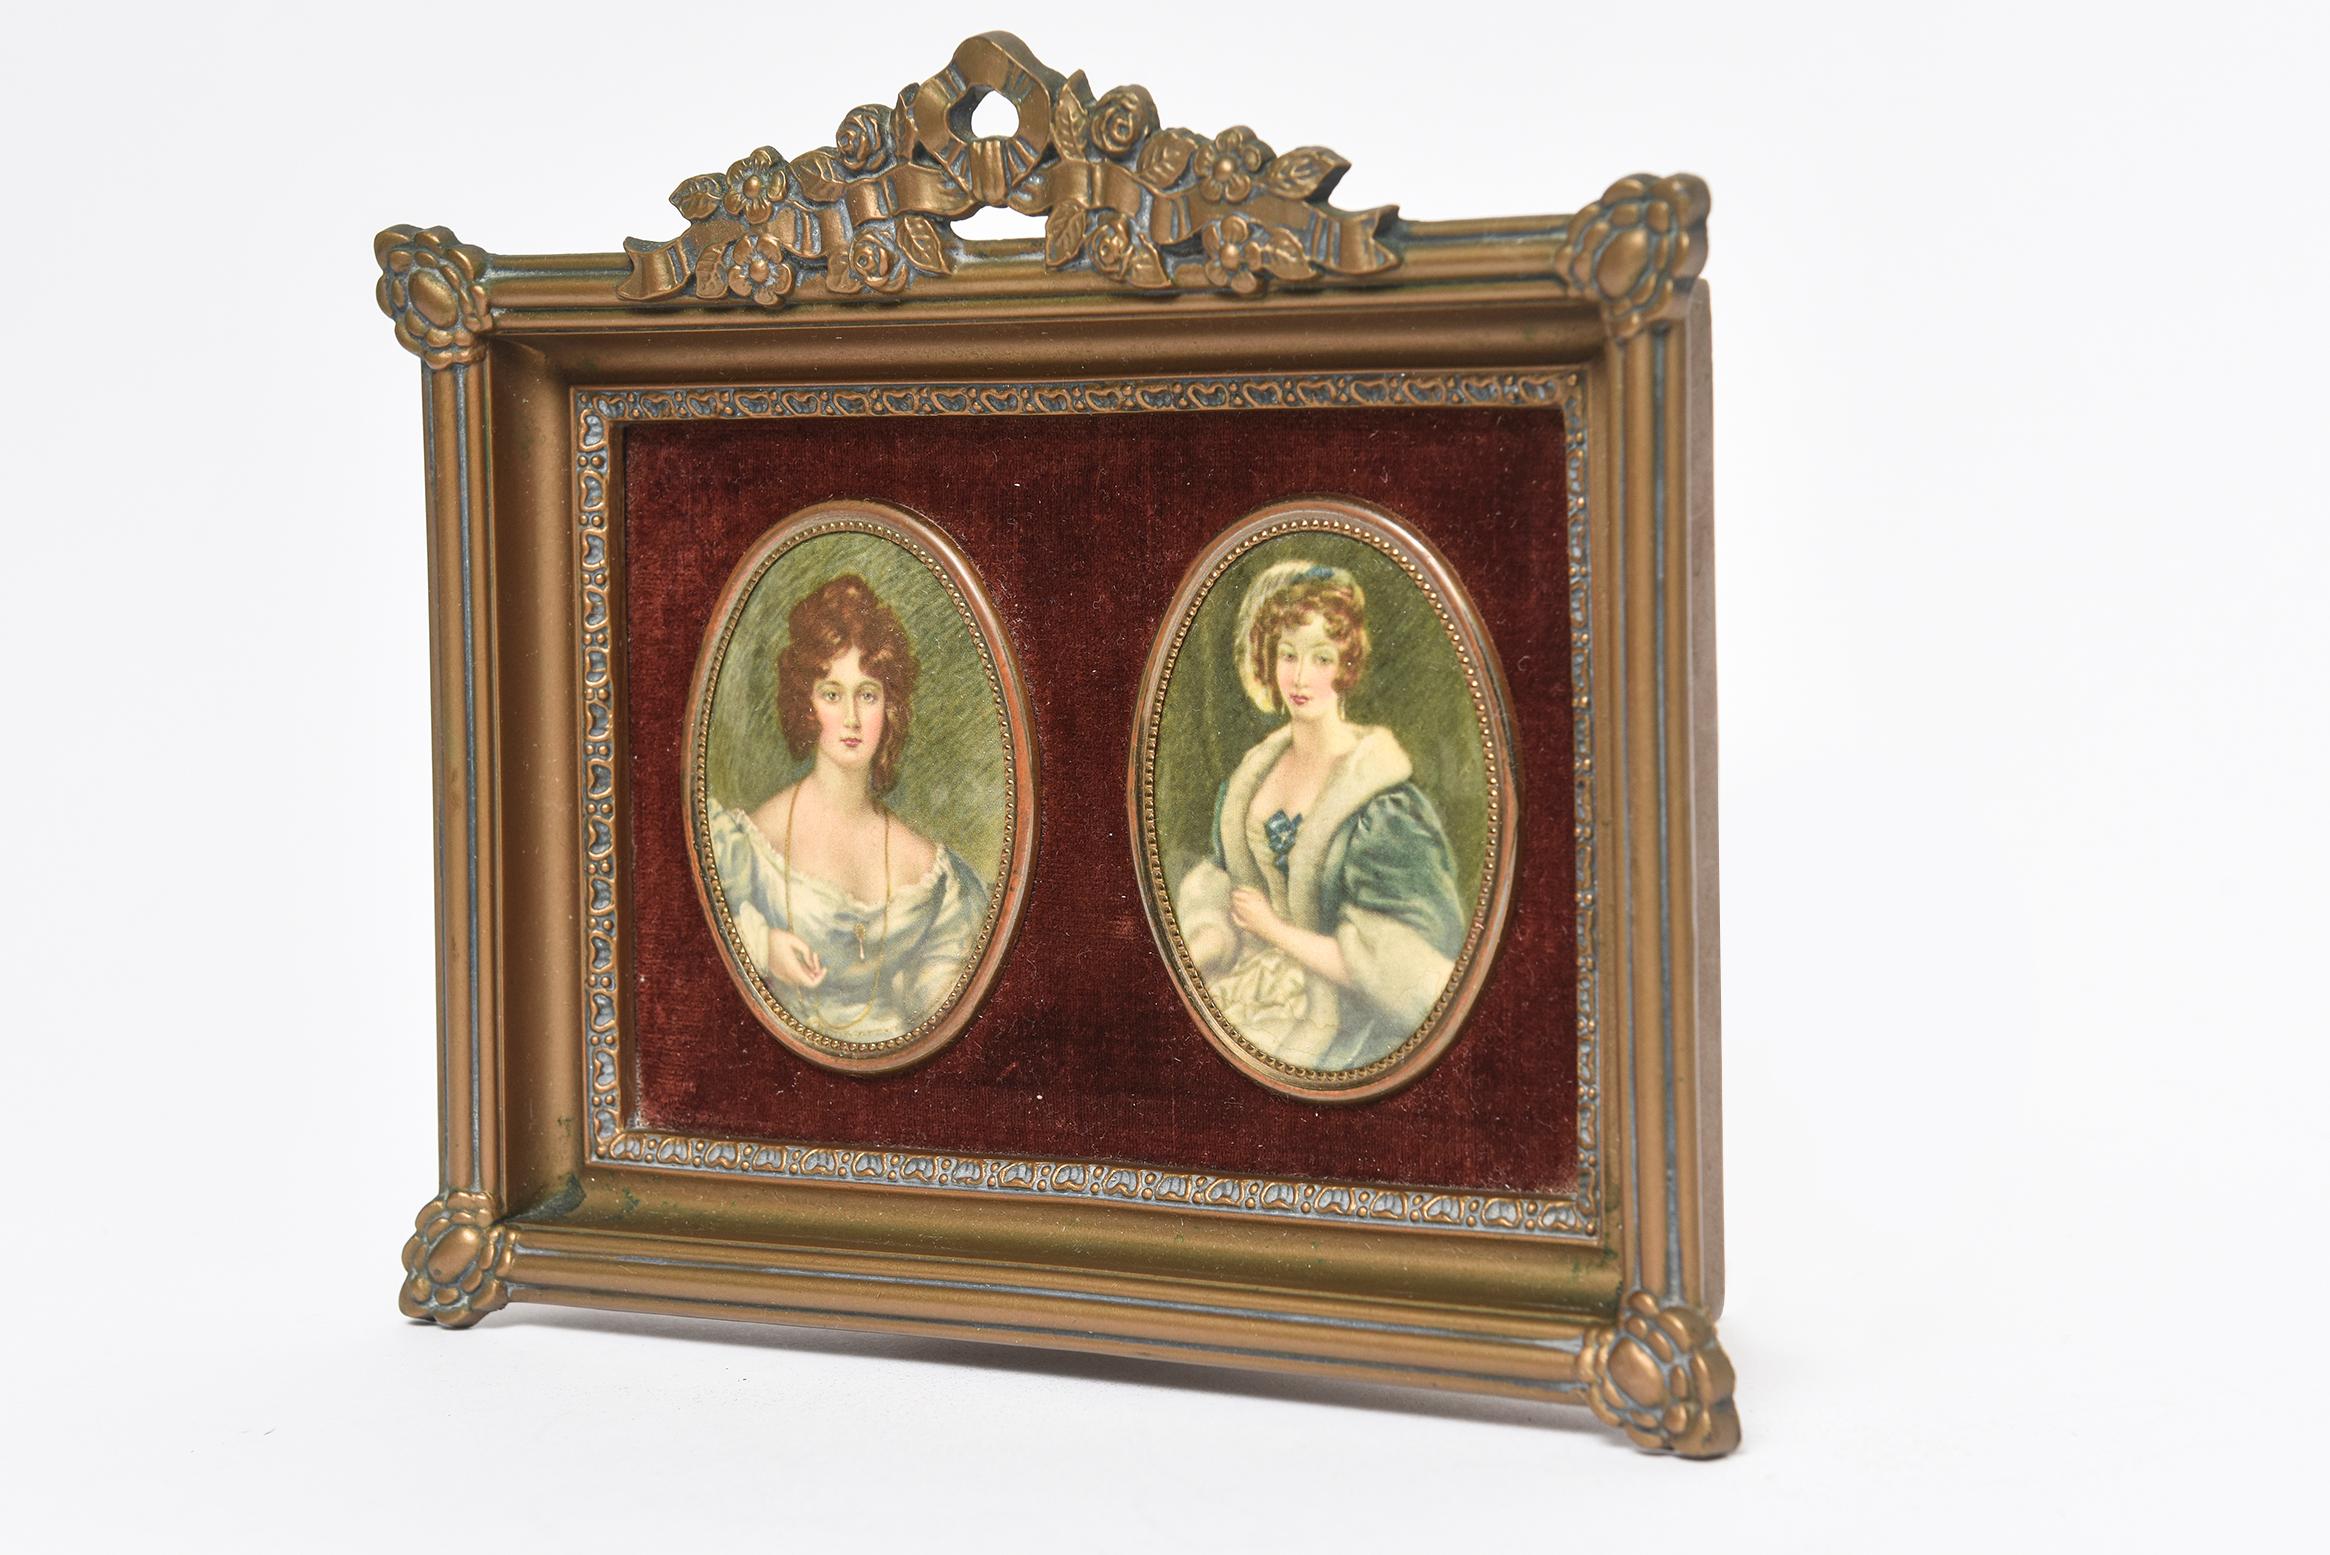 This floral gold resin frame features replicas of famous prints of Mary by C.E. Leslie R.A. and Mrs. Croker by Sir Thomas Lawerence set on a burgundy velvet backdrop.